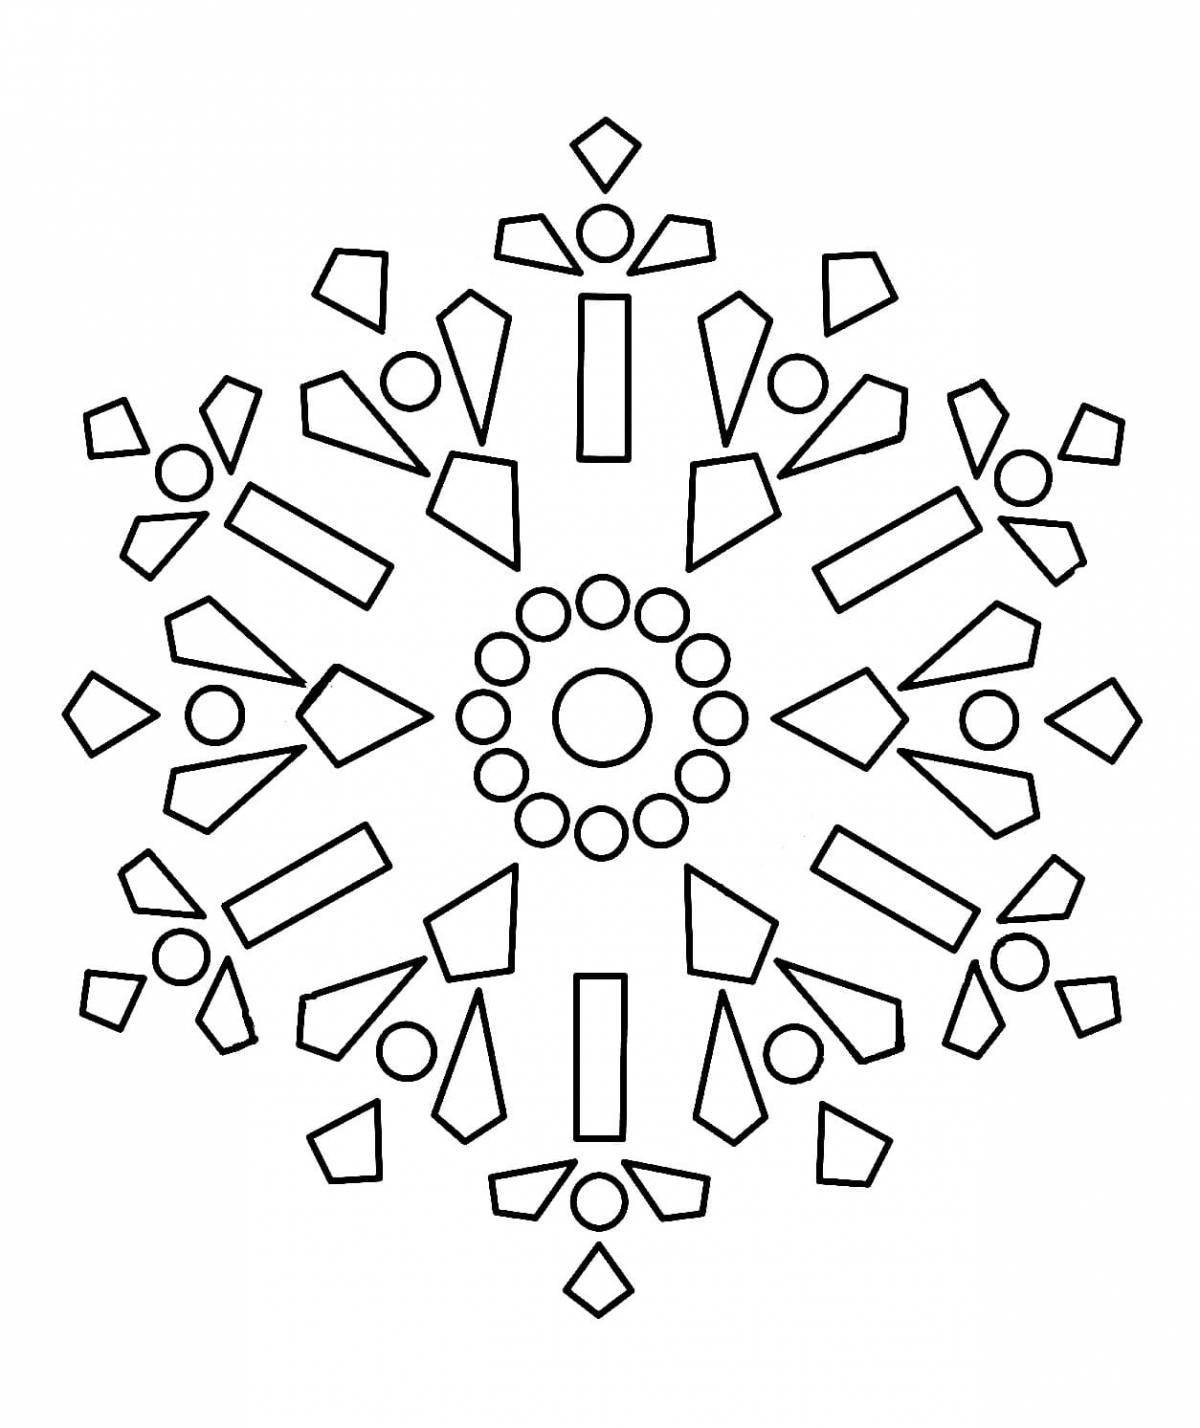 Colorful snowflake coloring book for children 3-4 years old